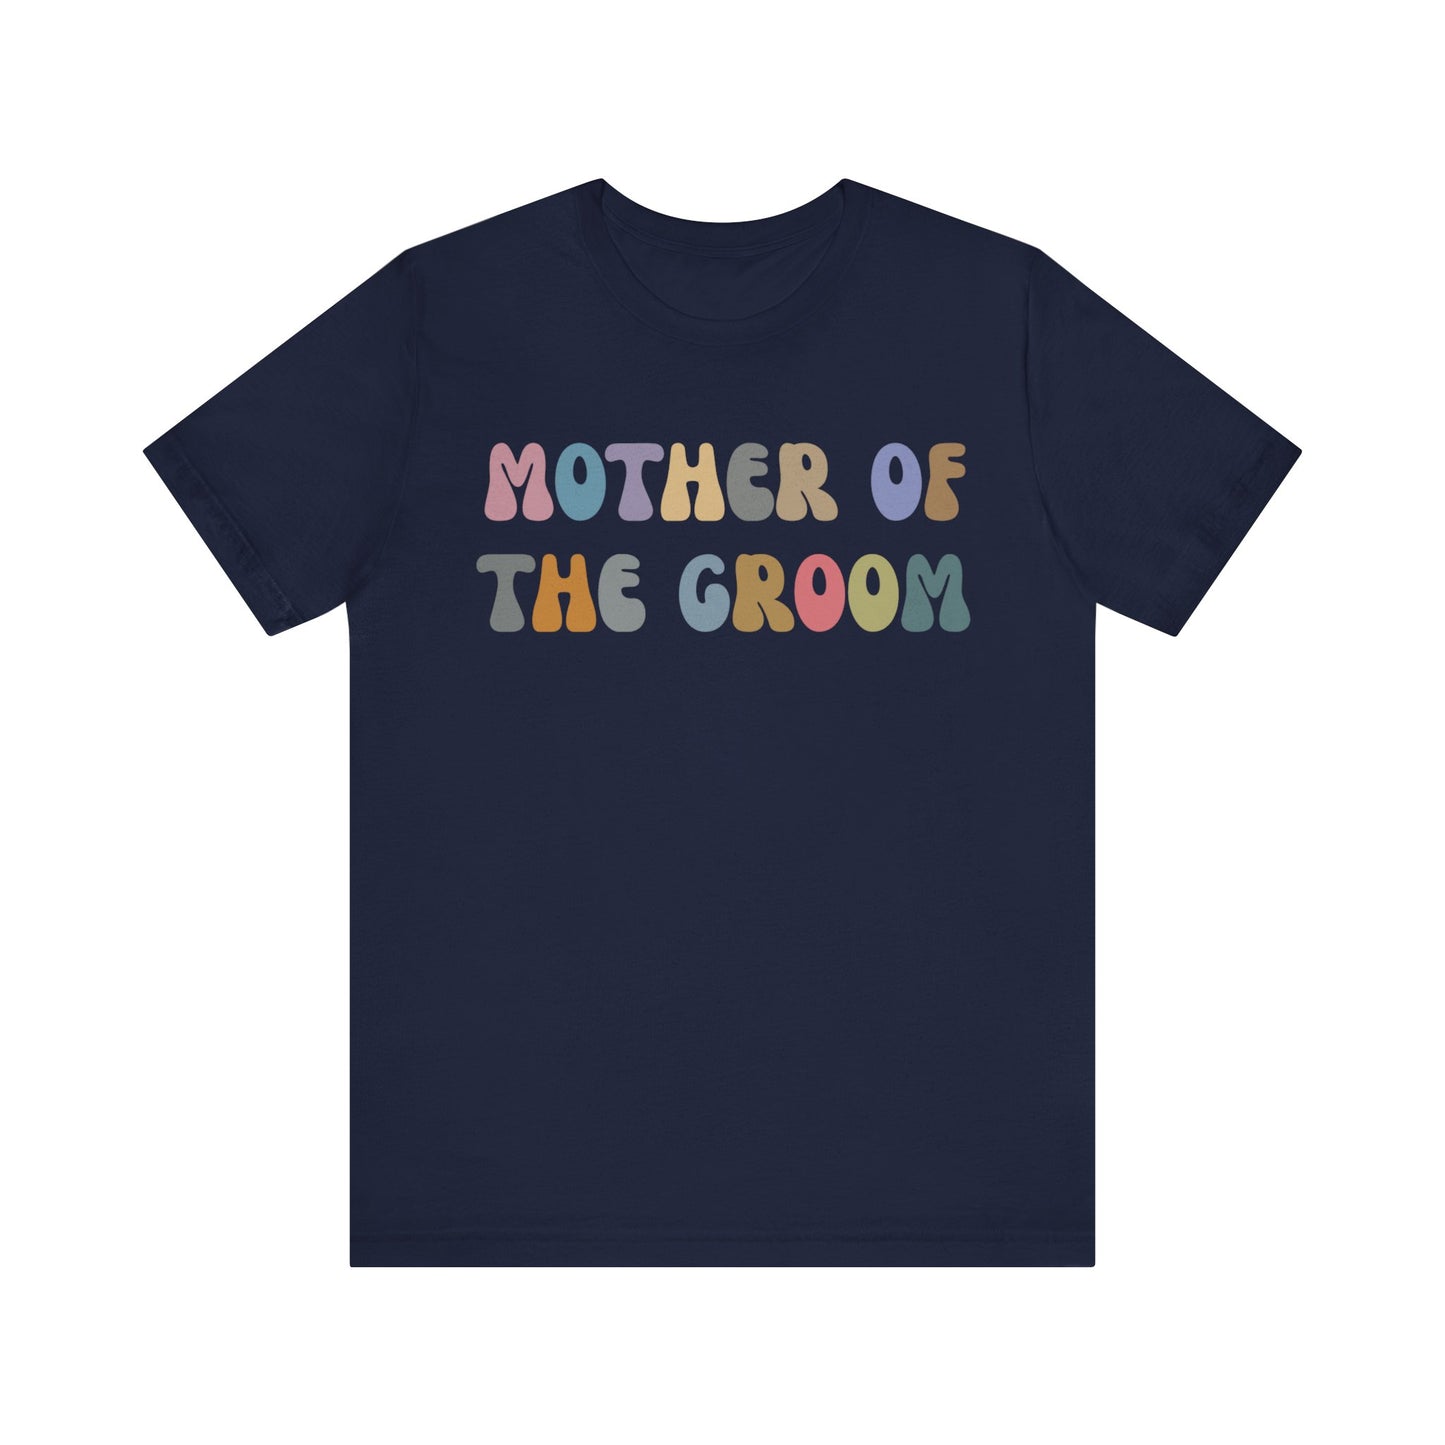 Mother of the Groom Shirt, Cute Wedding Gift from Son, Engagement Gift, Retro Wedding Gift for Mom, Bridal Party Shirt for Mom, T1146